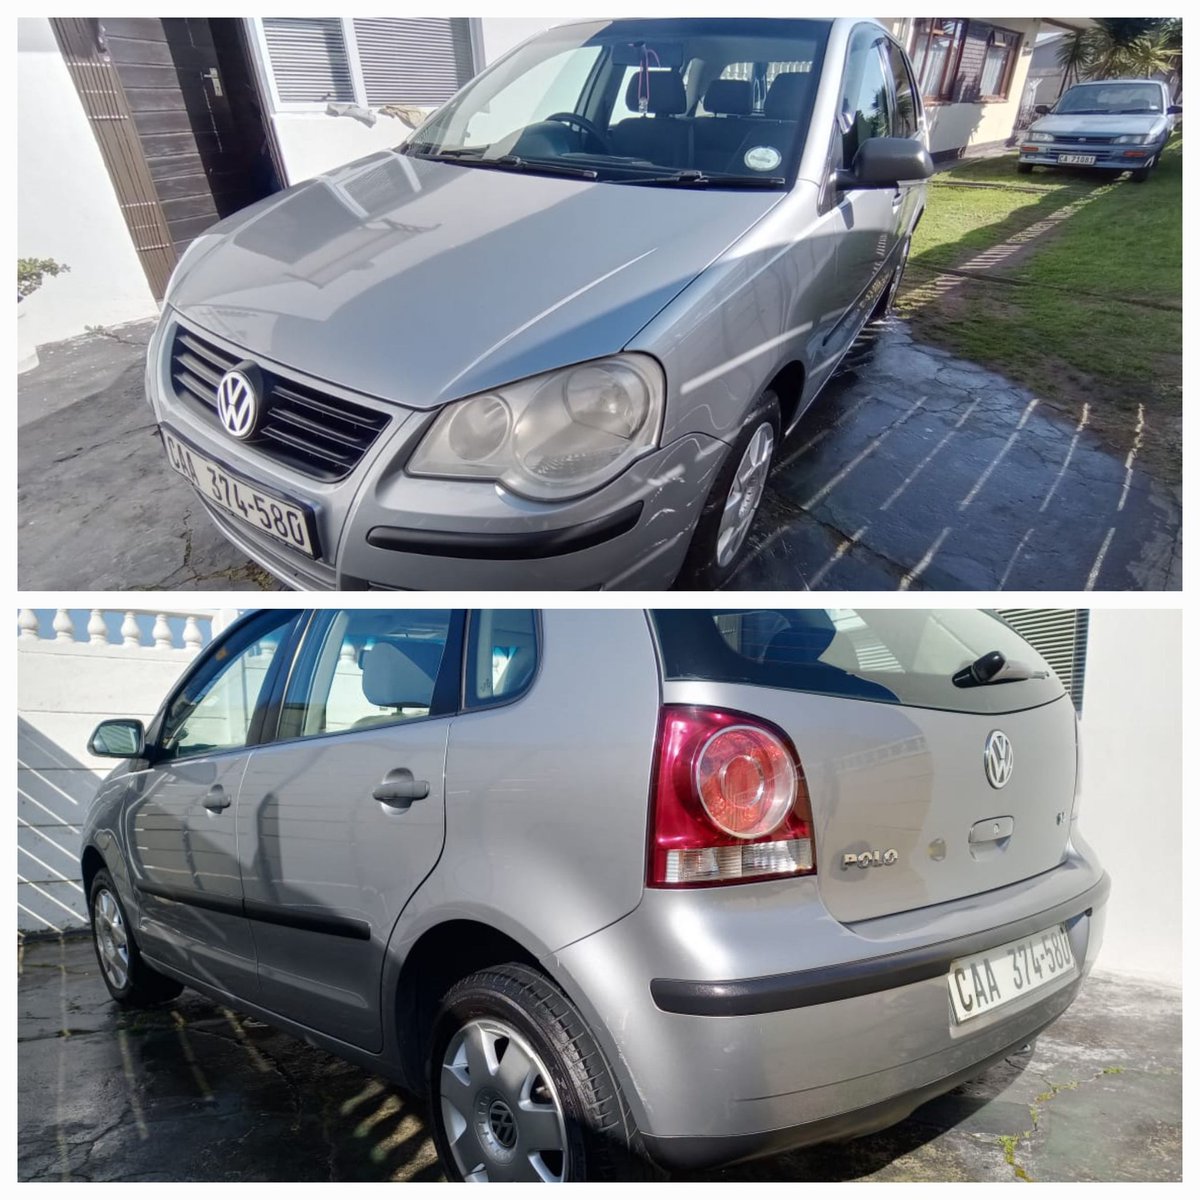 Please RT, CAA 374580 stolen in front of St Mark's Anglican Church District Six, contact me or SAPS if spotted. Owner awaiting on case number at SAPS #StolenVehicle #DistrictSixCapeTown @SAPoliceService